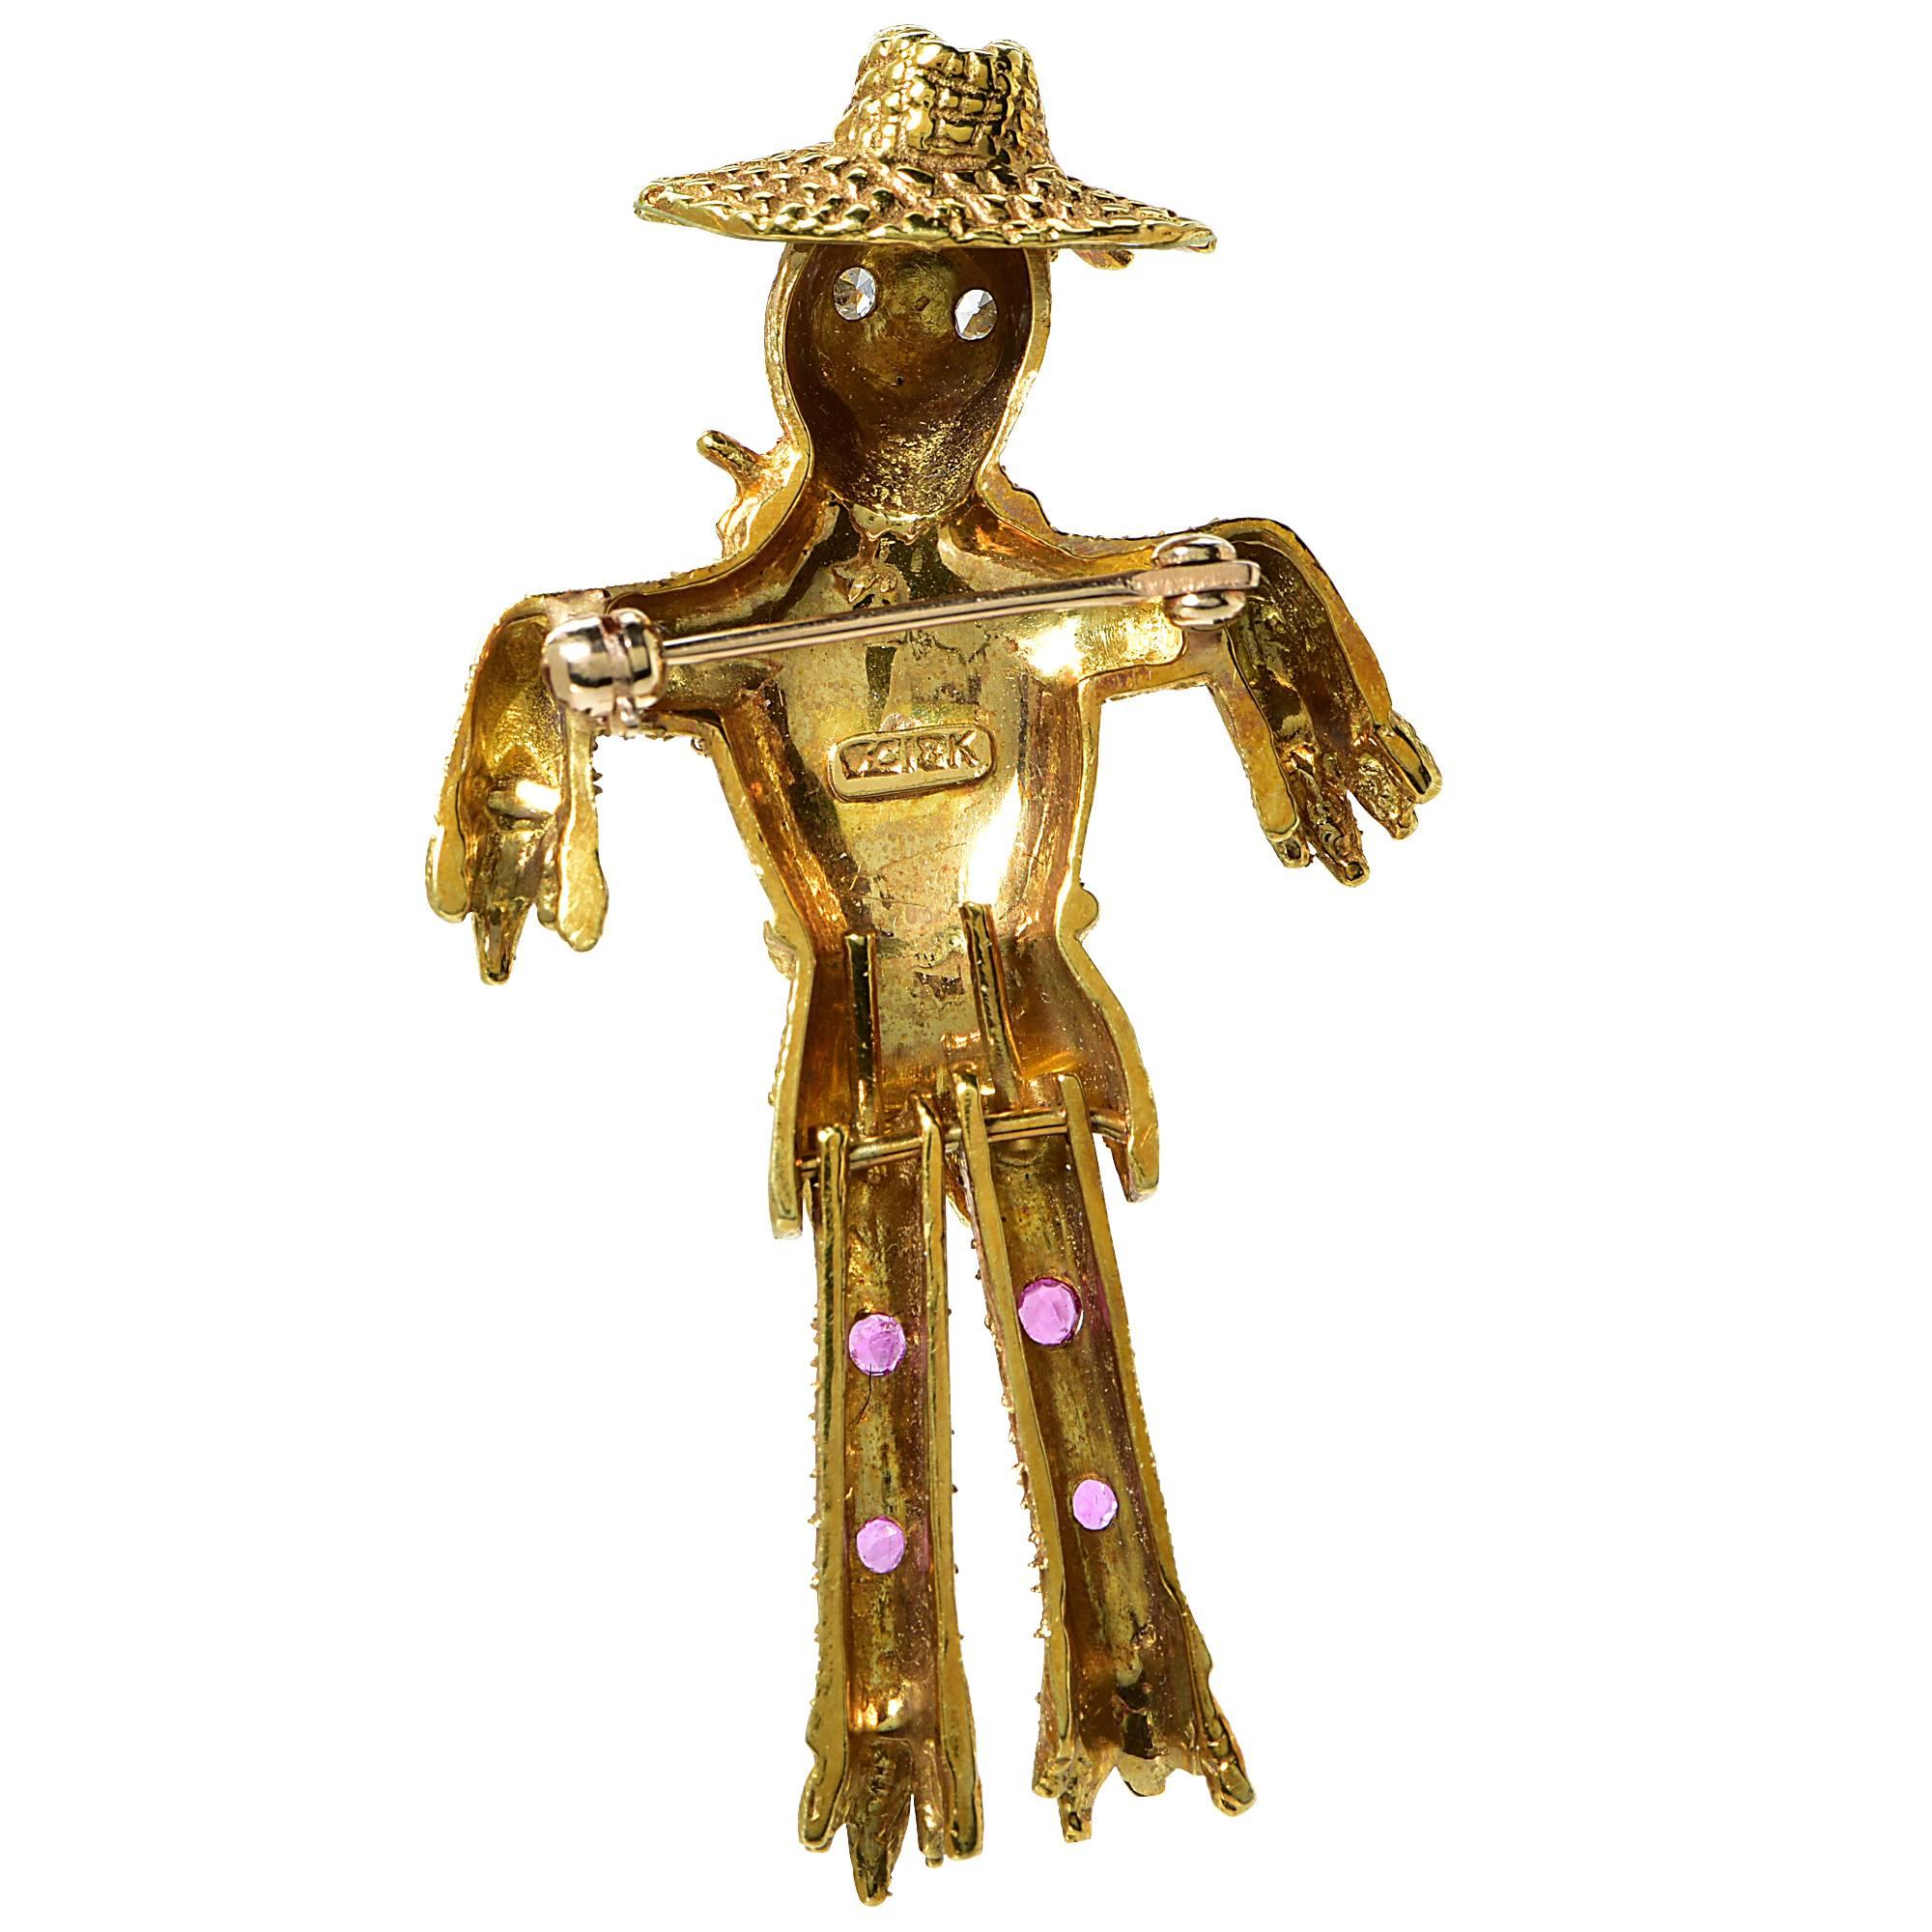 18k yellow gold scarecrow brooch featuring 2 single cut diamonds weighing .02cts total, G color, VS clarity.

Measurement: 2 inch length by 1.2 inch width by .3 inch depth
Metal weight: 12.36 grams

This brooch is accompanied by a retail